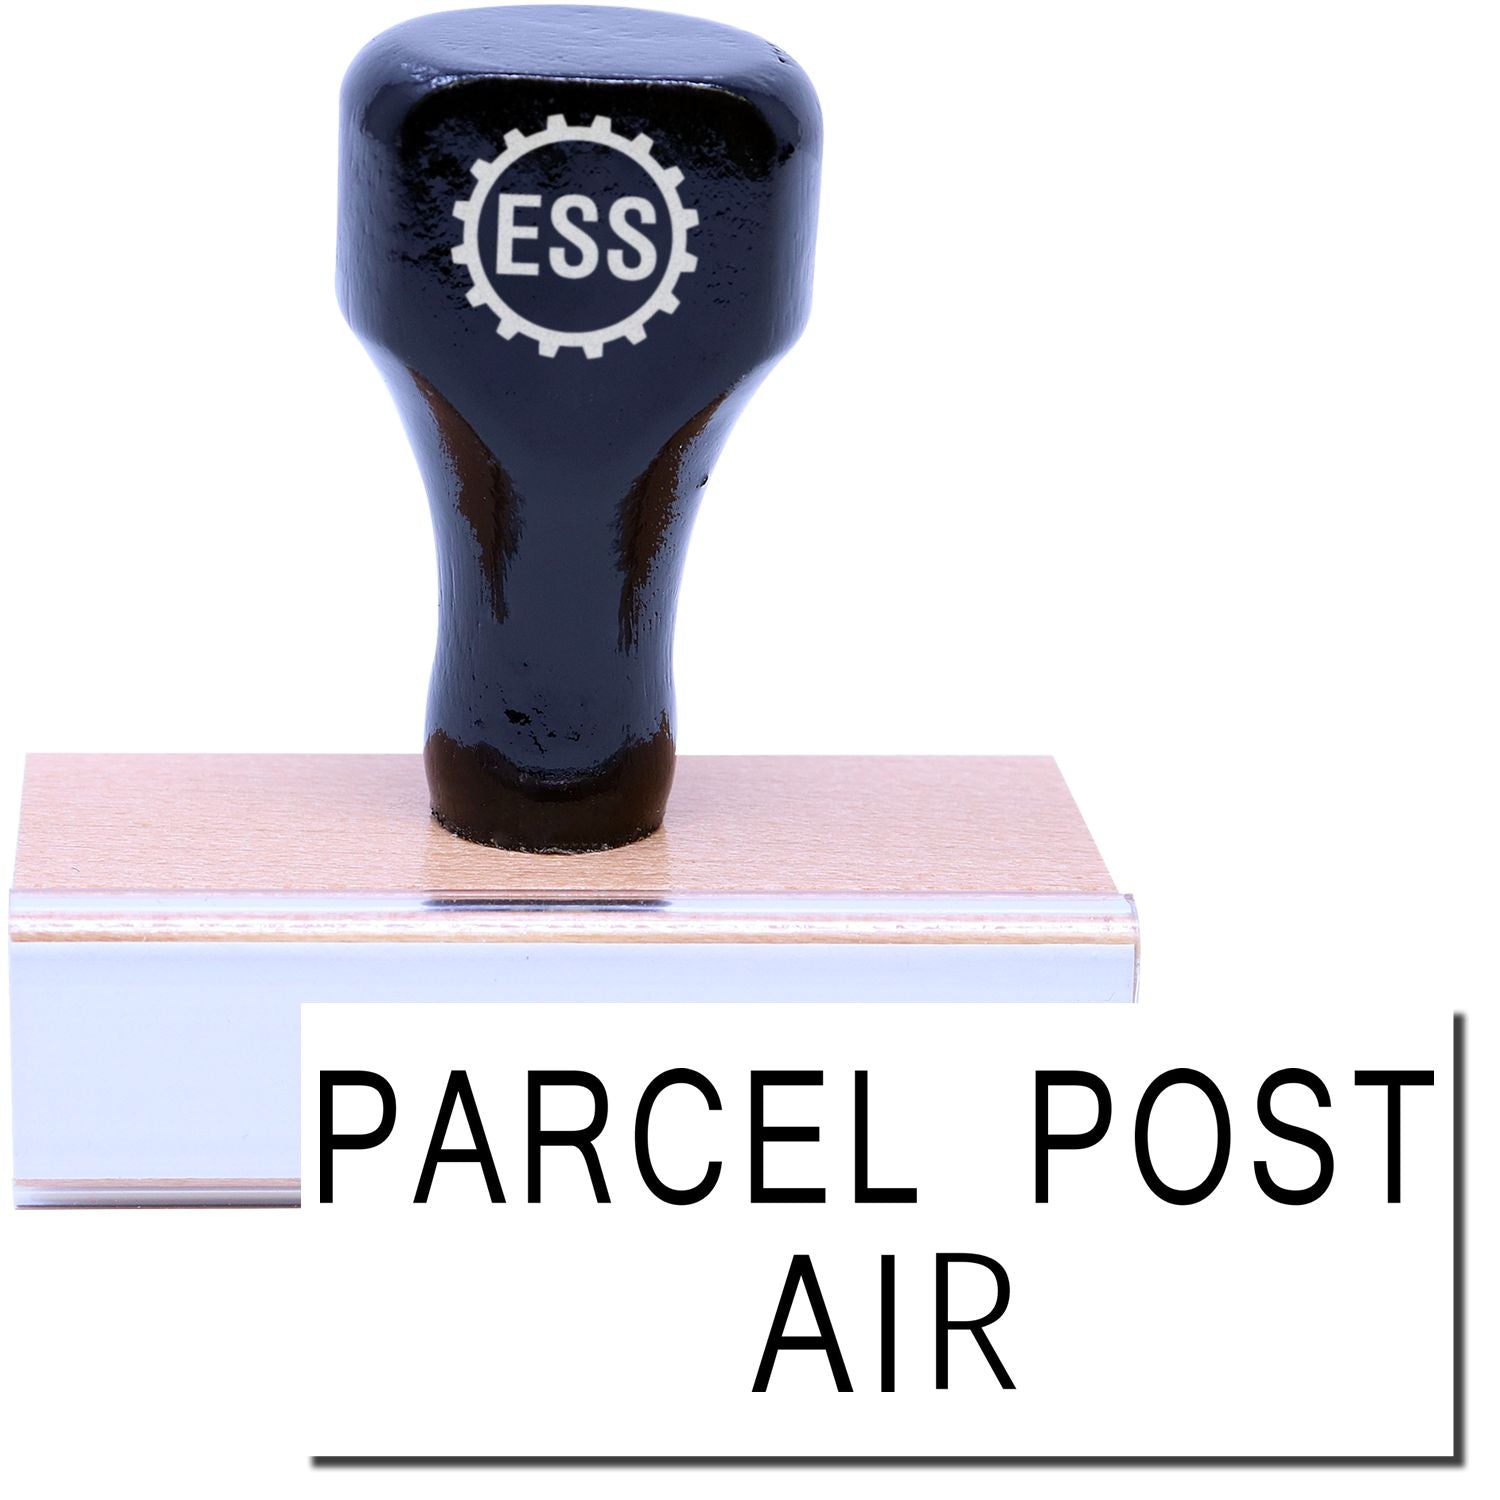 A stock office rubber stamp with a stamped image showing how the text "PARCEL POST AIR" in a large font is displayed after stamping.